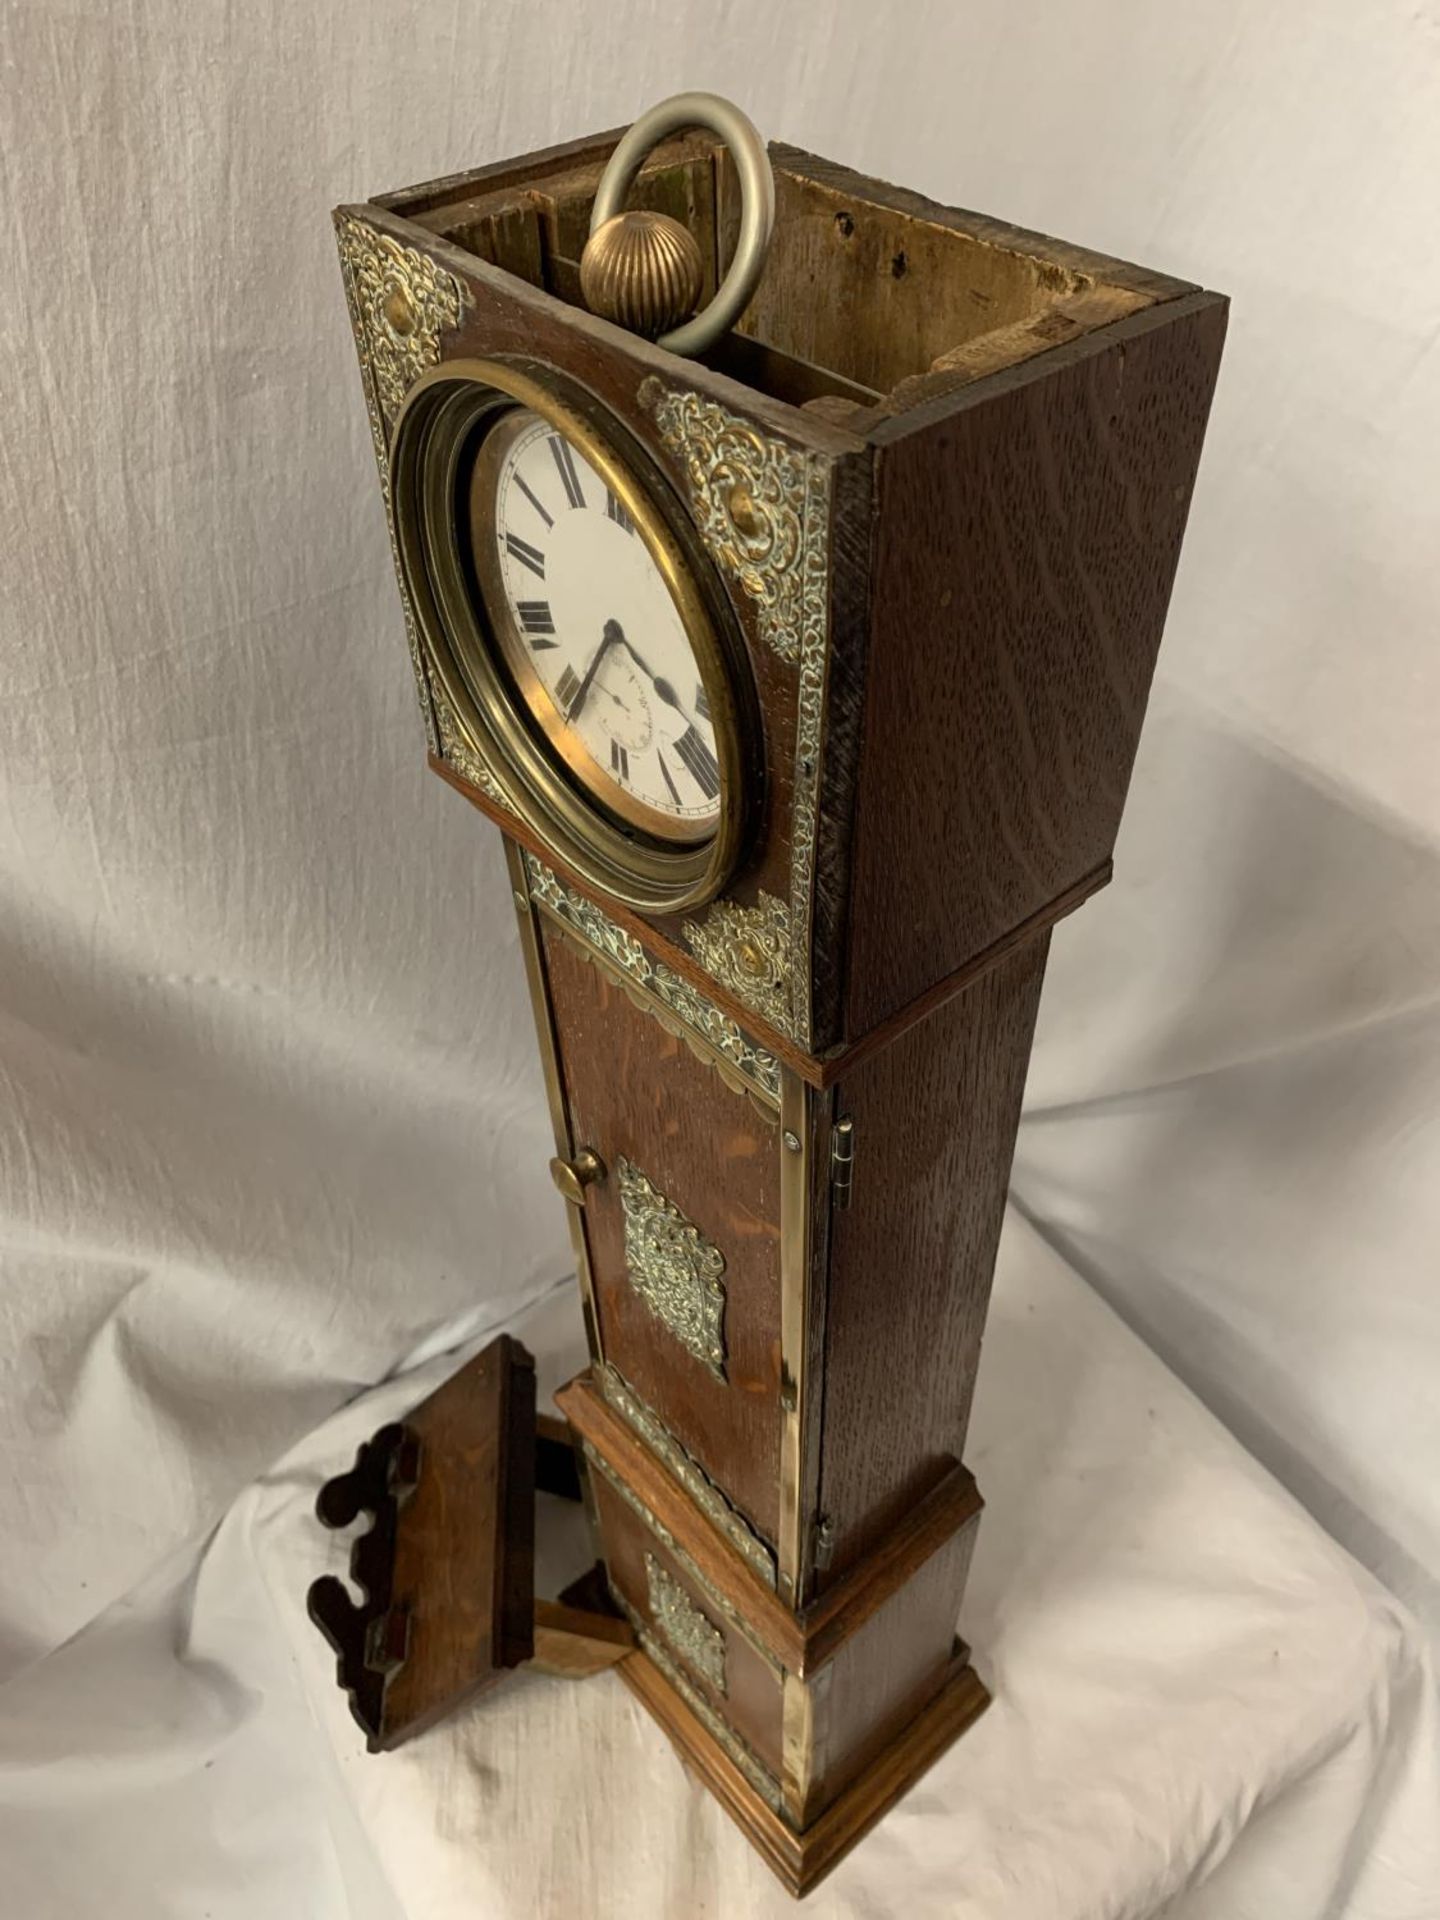 A SMALL VINTAGE OAK REPLICA GRANDMOTHER CLOCK WITH BRASS DETAIL H: APPROXIMATELY 75CM - Image 4 of 4